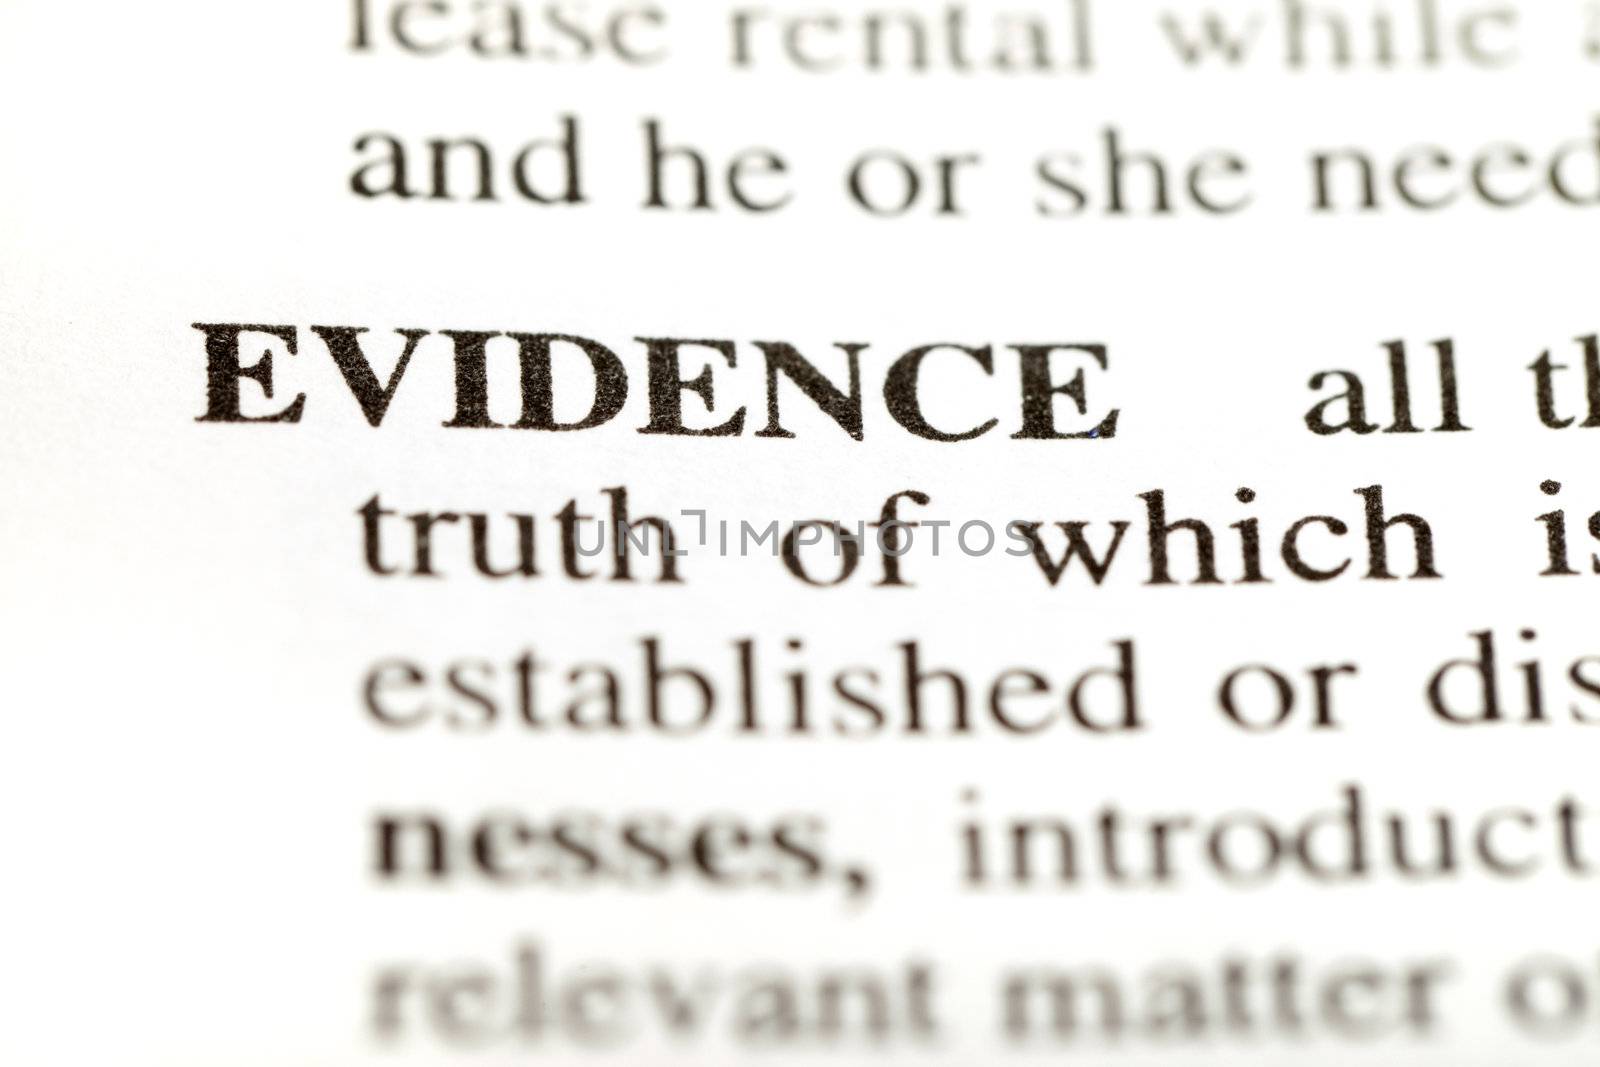 Definition of the word evidence from a legal dictionary